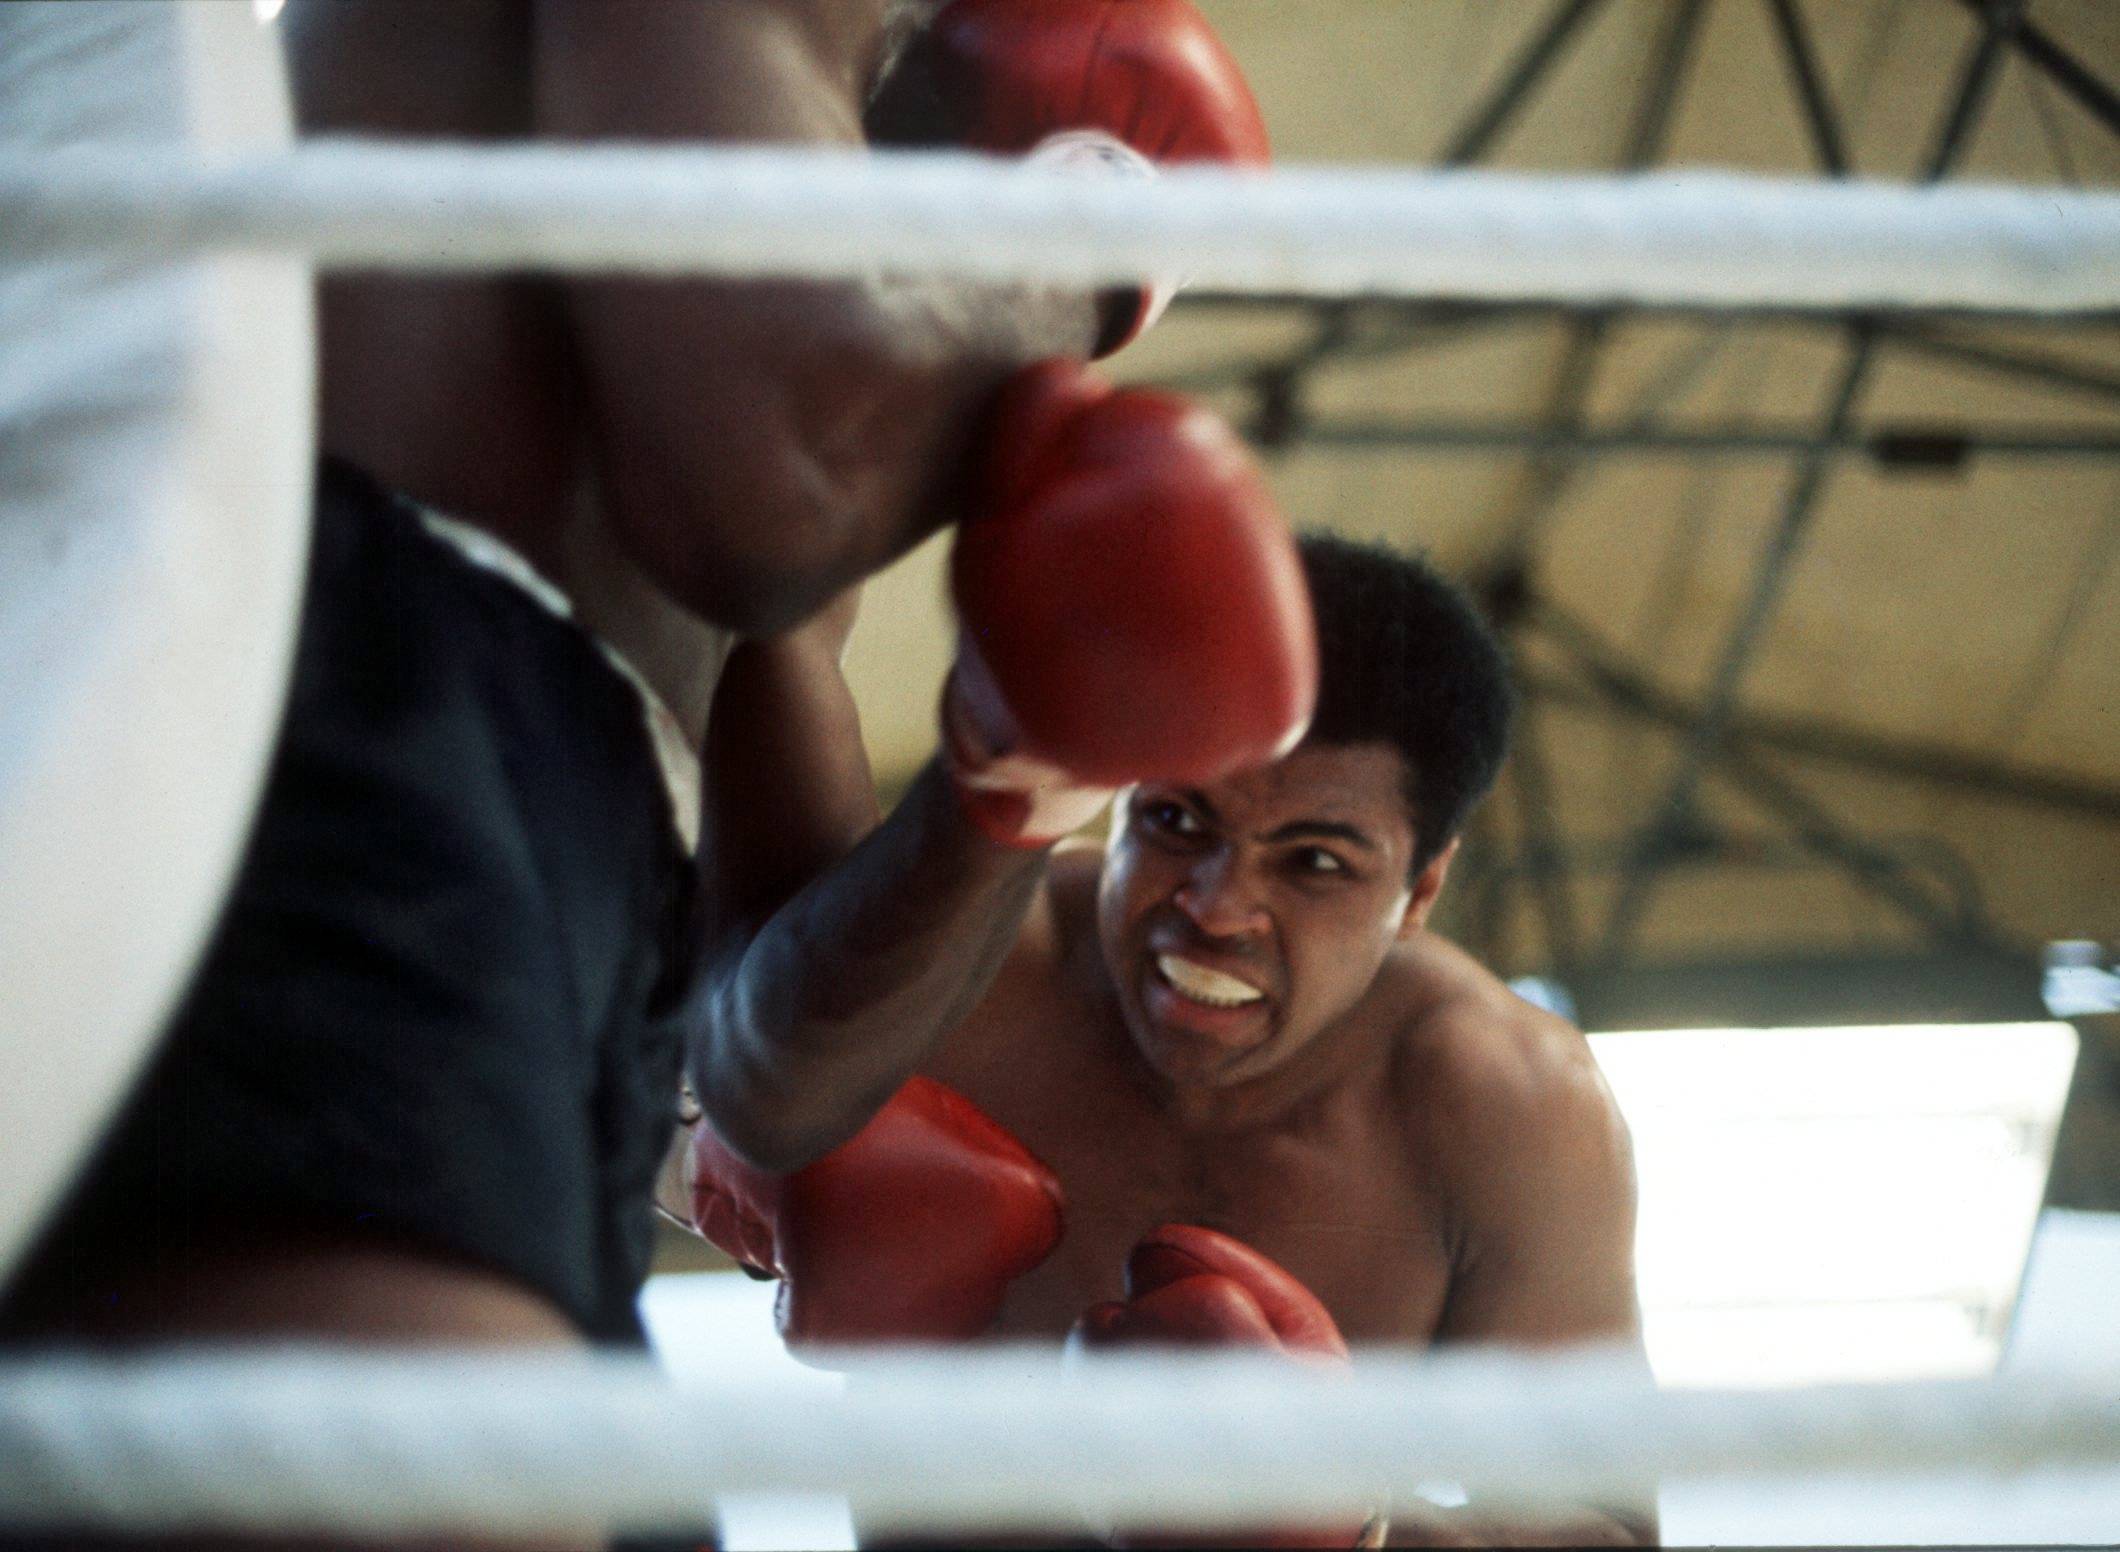 Muhammad Ali dodged 21 punches in 10 seconds like it was nothing